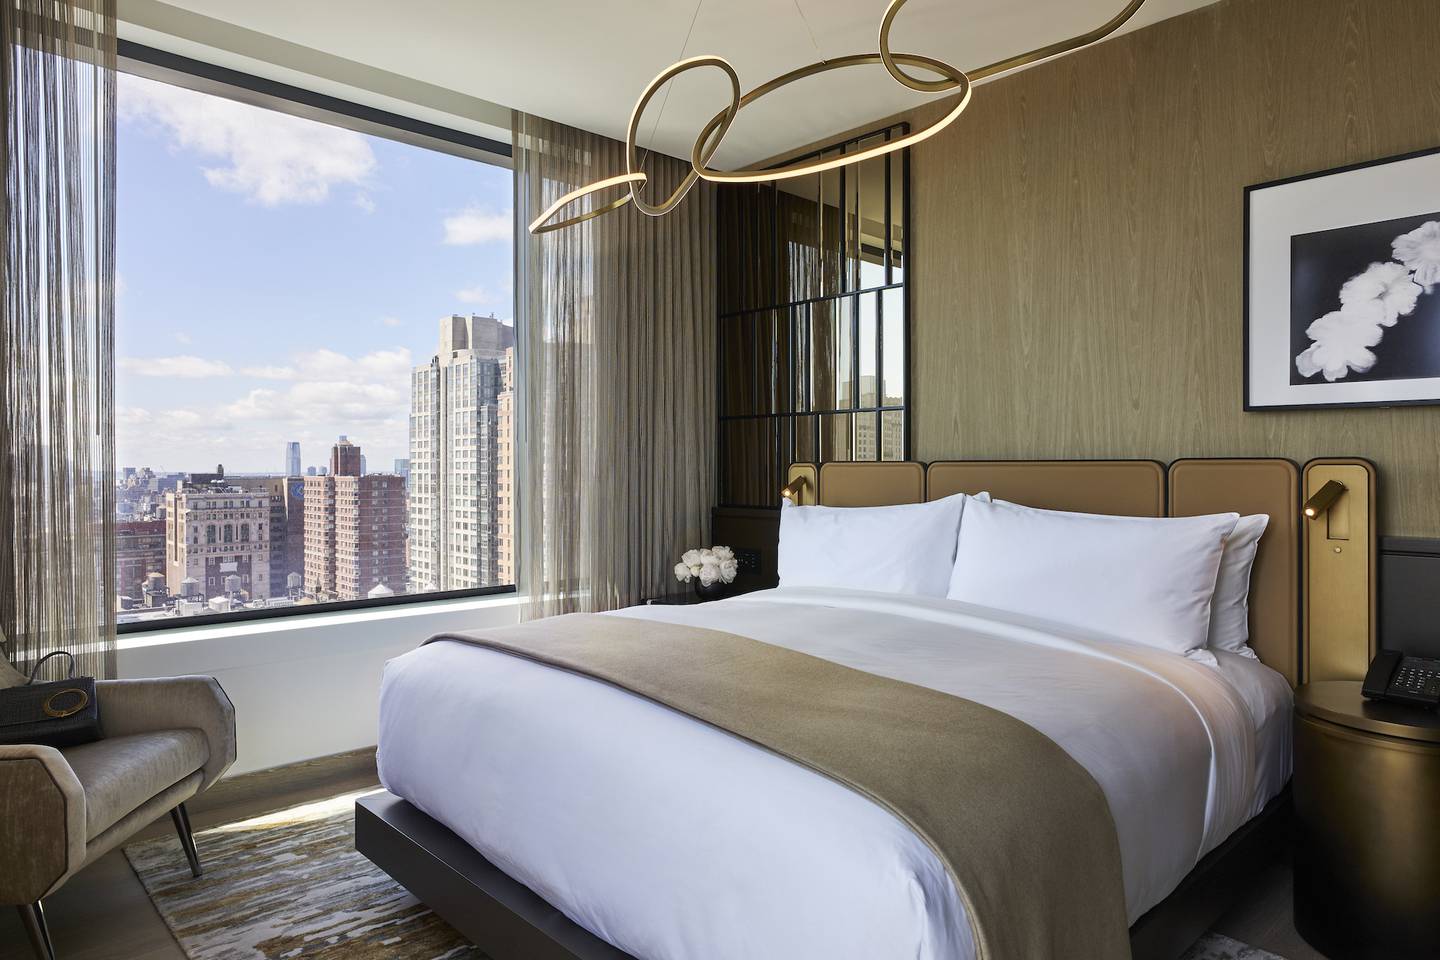 Rooms at The Ritz-Carlton New York, NoMad, offer views of some of the city's most recognisable buildings. Photo: Marriott